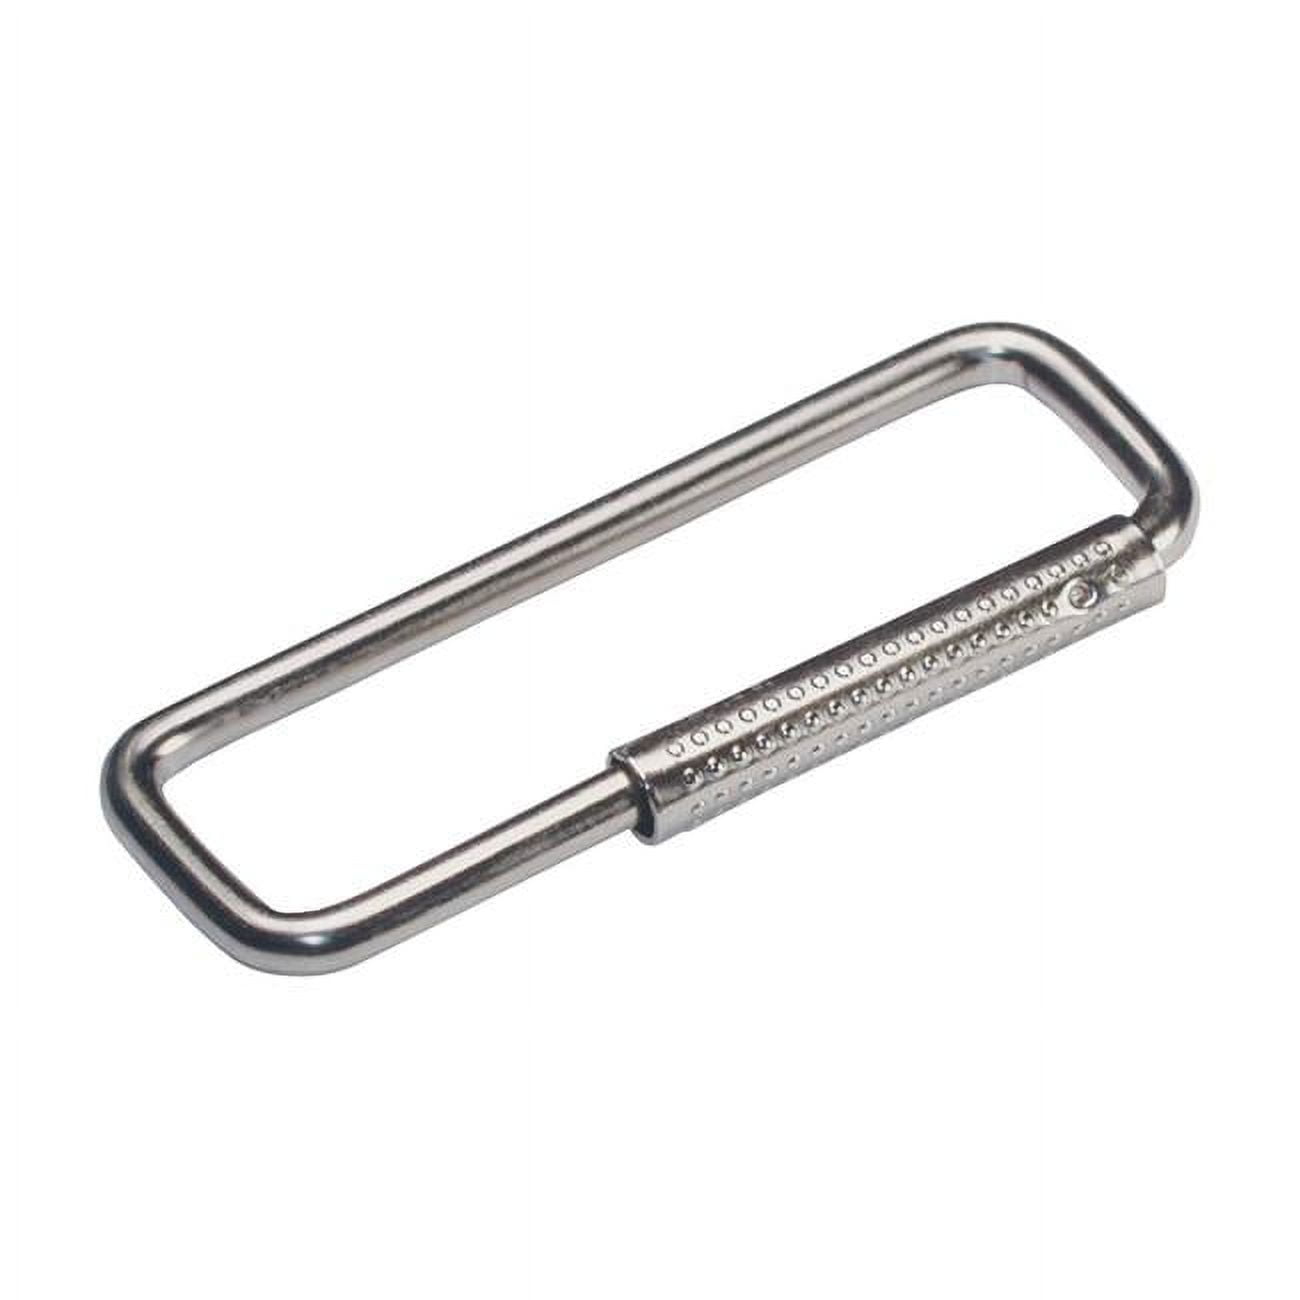 Shop for and Buy Flexible Stainless Steel Cable Tamper Proof Key Ring 4  Inch Diameter at . Large selection and bulk discounts available.